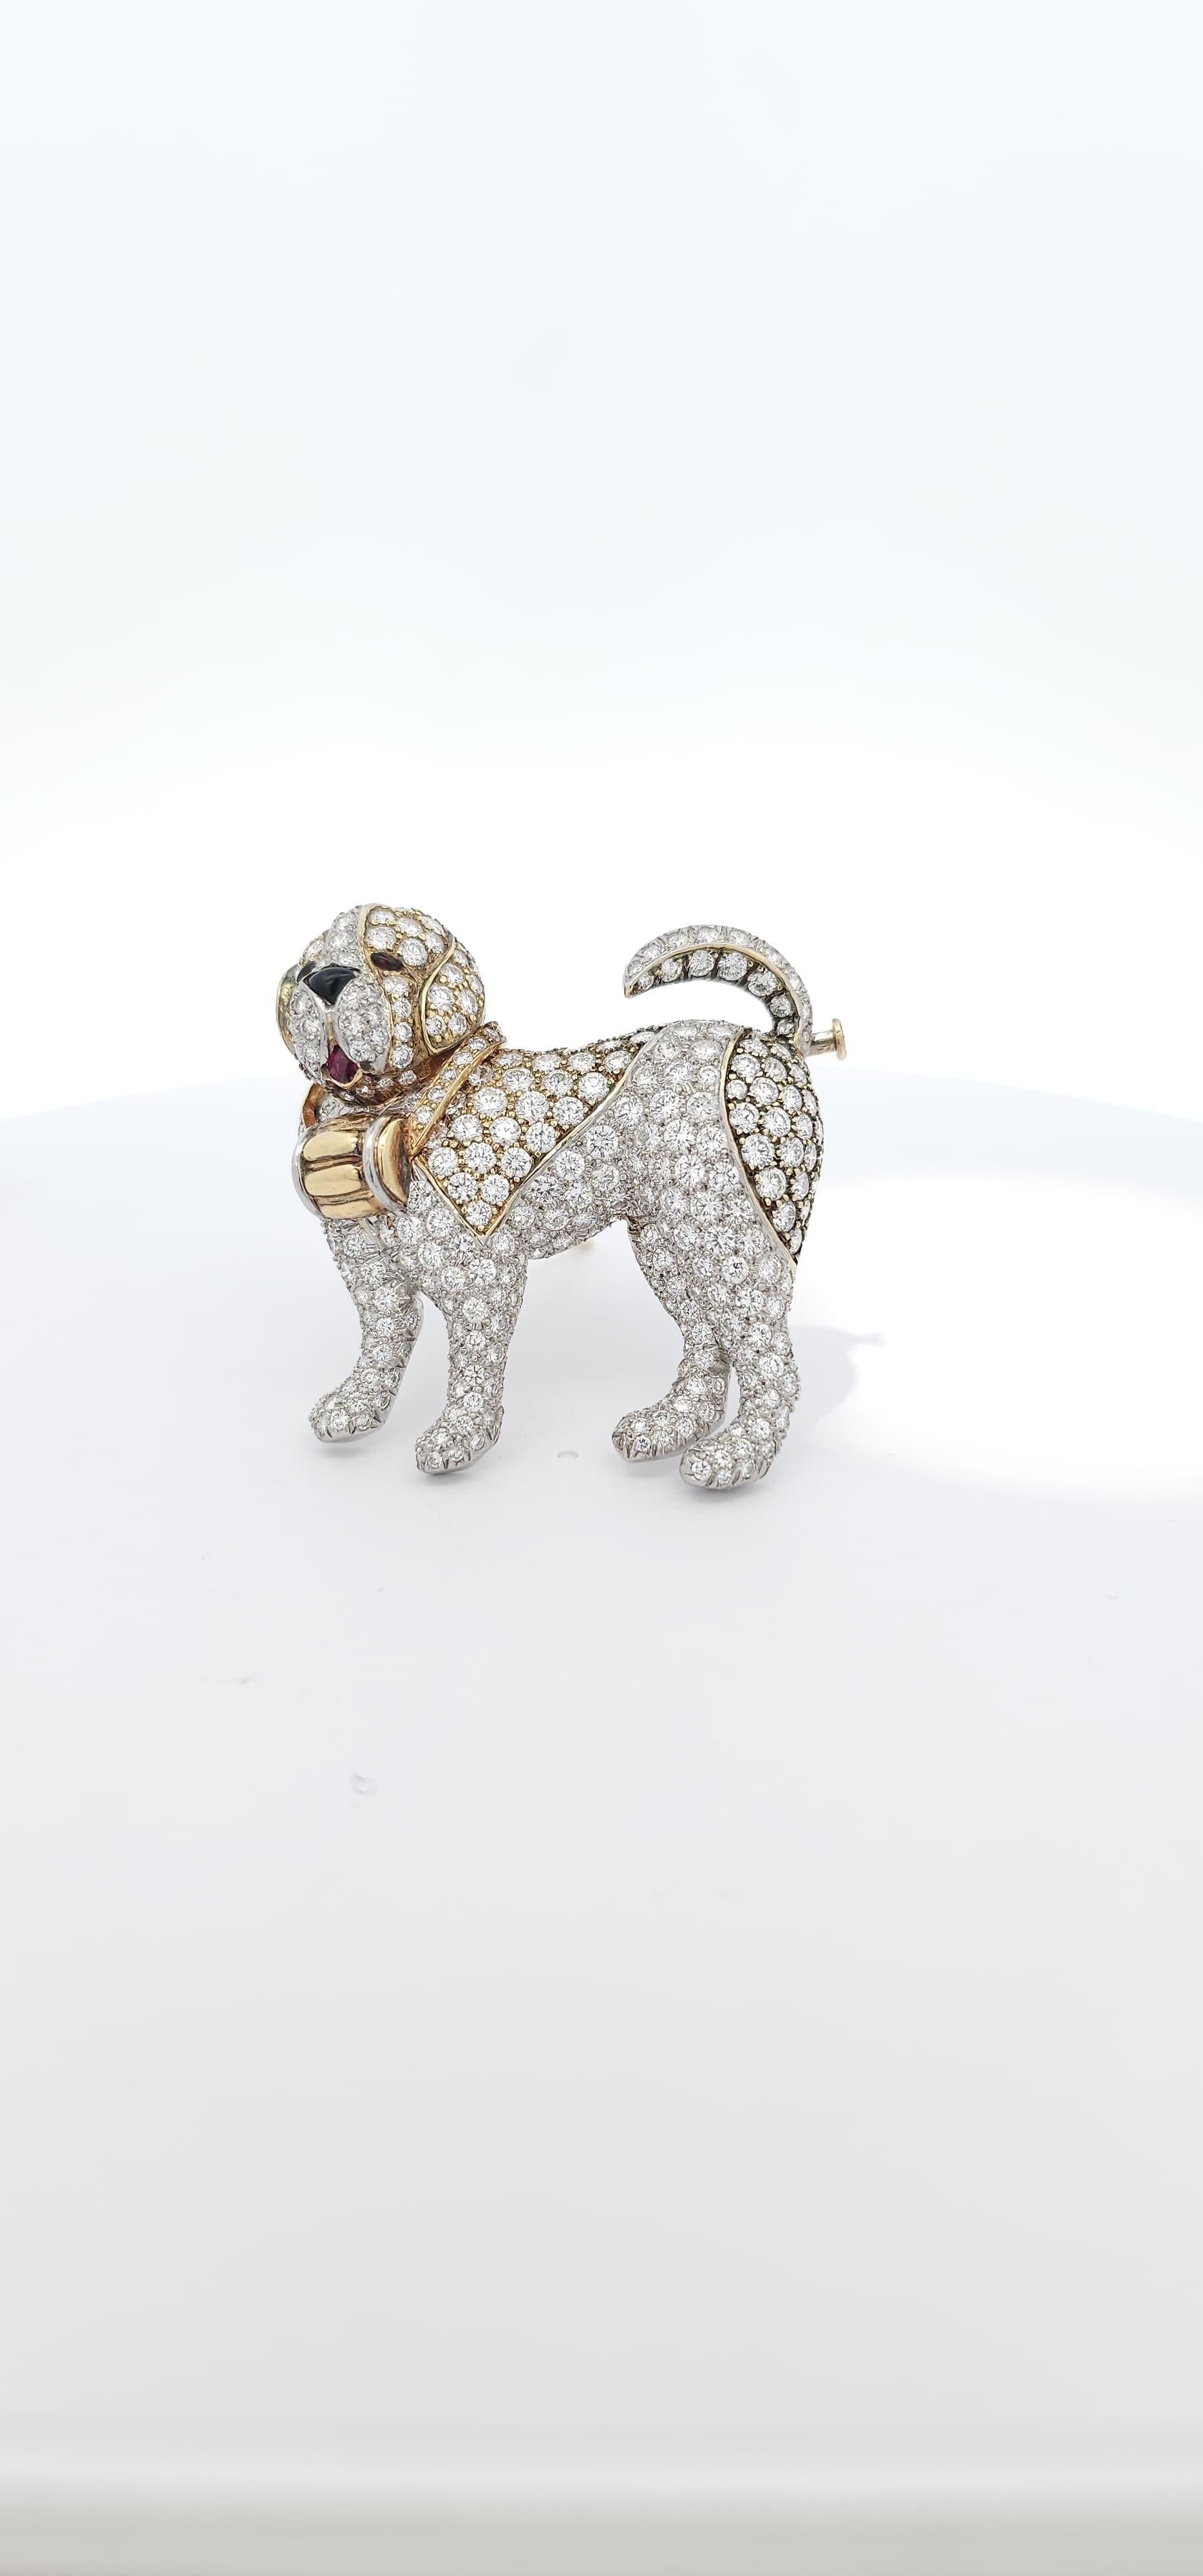 Van Cleef & Arpels Diamond Dog Brooch. 

A Saint Bernard dog brooch featuring pave diamonds, a ruby as the tongue & black enamel nose & eyes.

Diamond Weight: approximately 8.15 carats

Measurements: 1.5 inches long 

Signed, VCA and numbered
Made